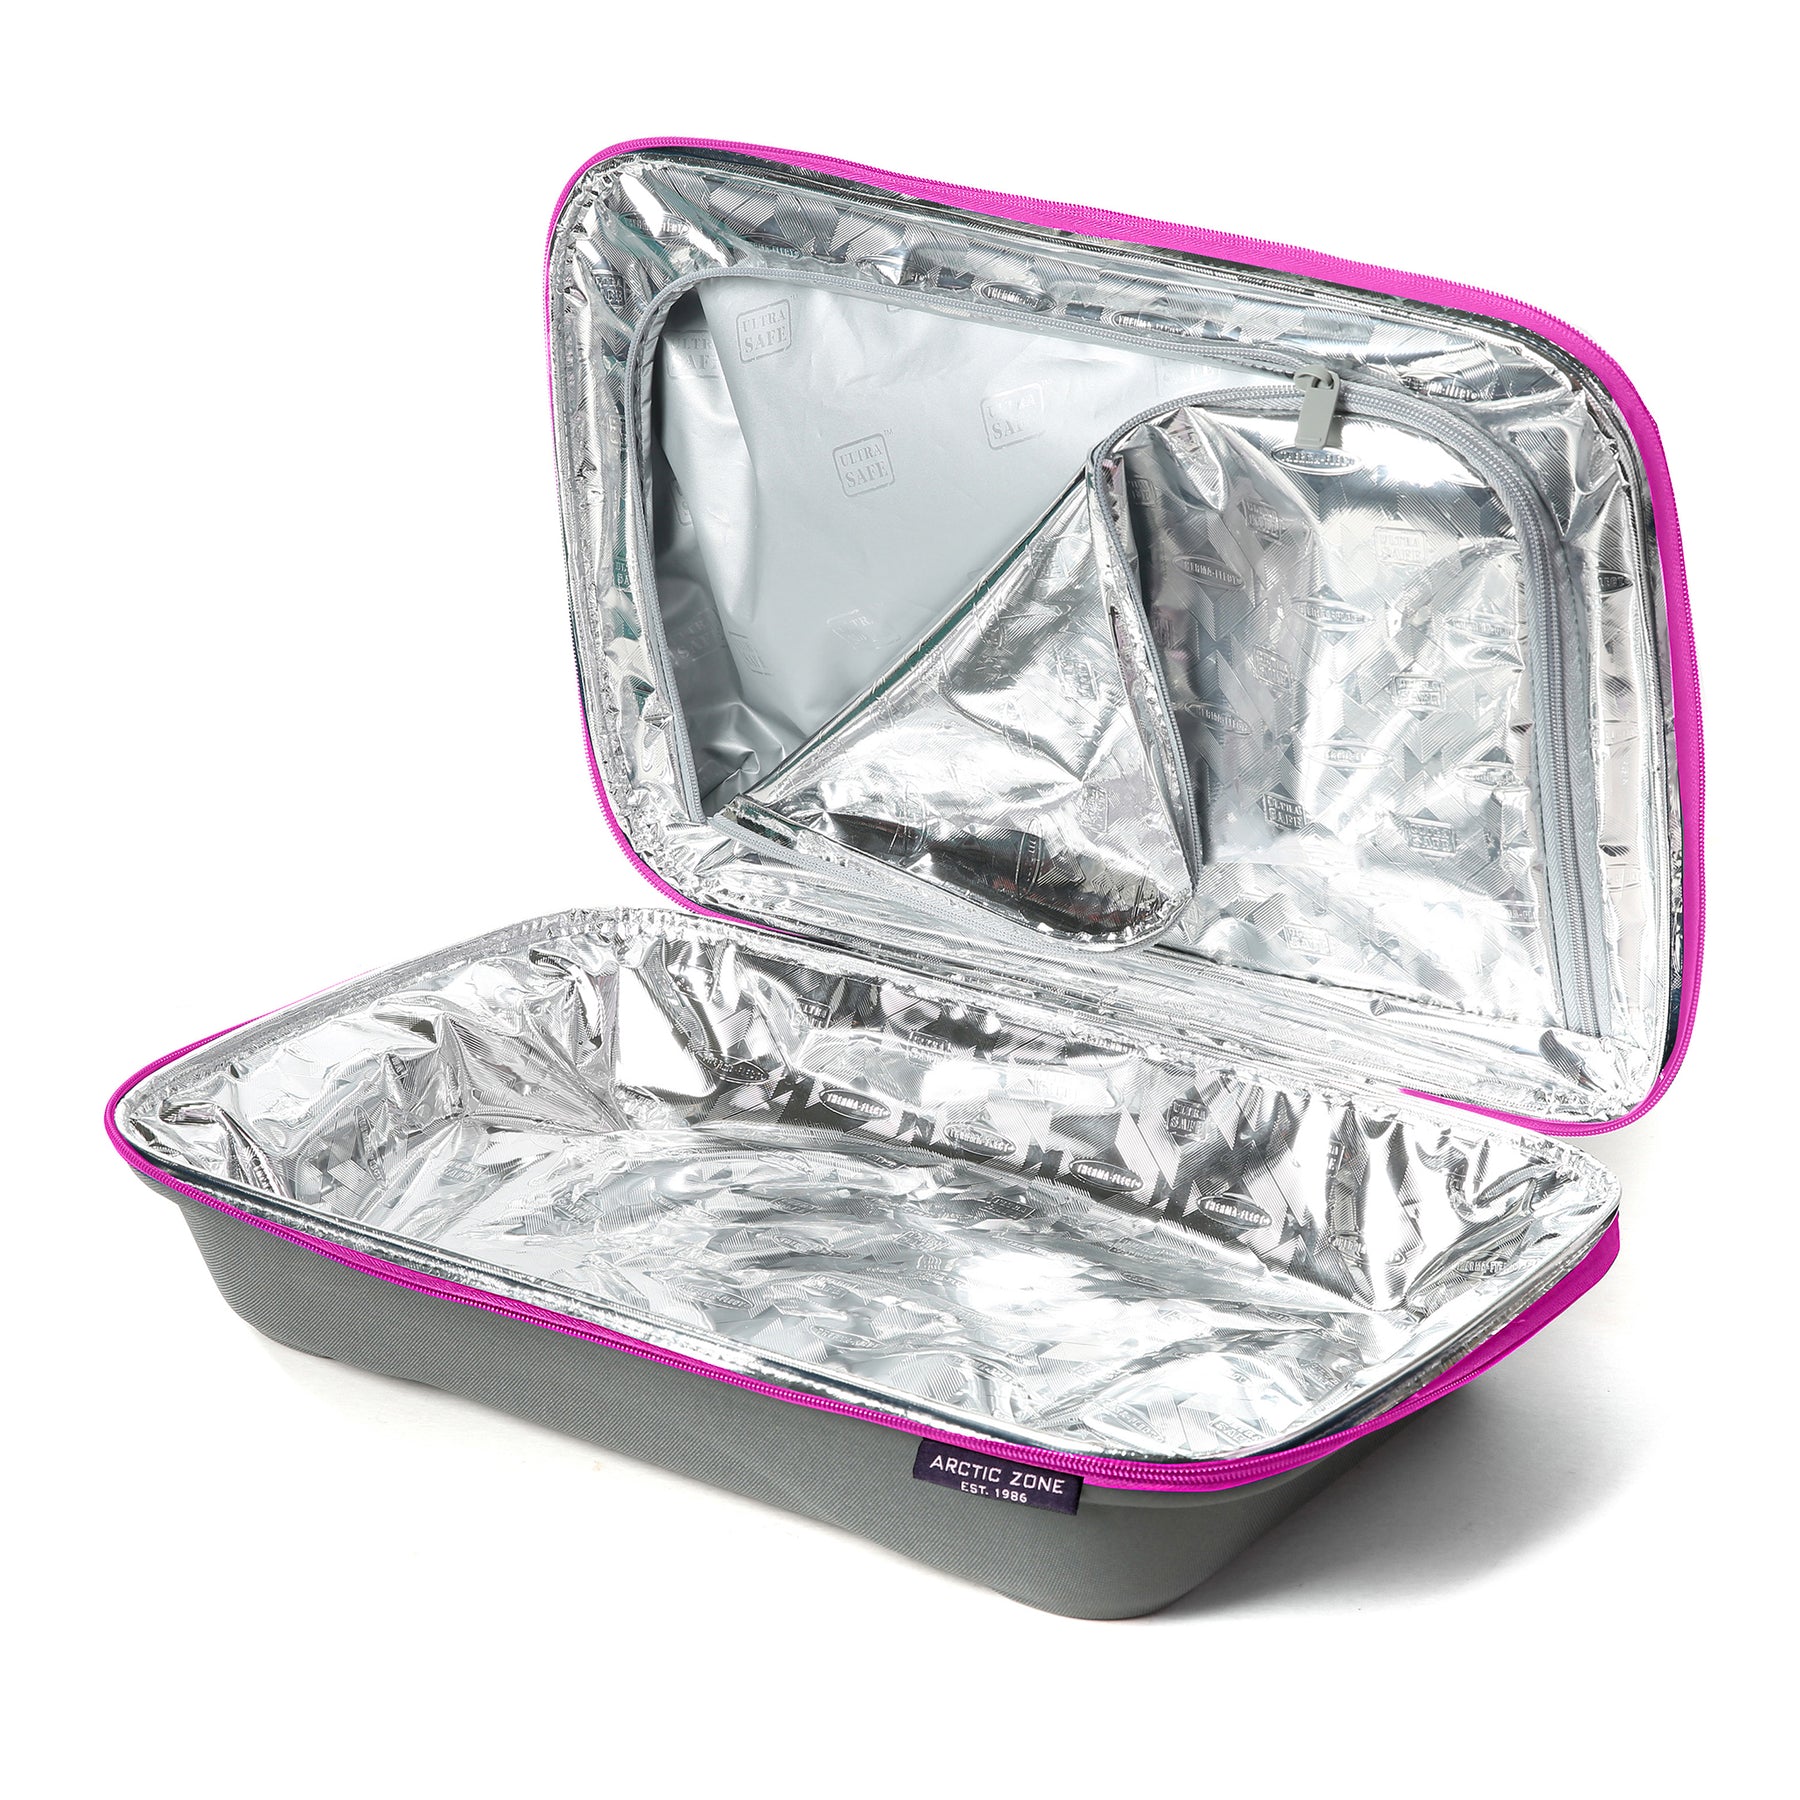 Arctic Zone® Food Pro Deluxe Thermal Carrier | Arctic Zone